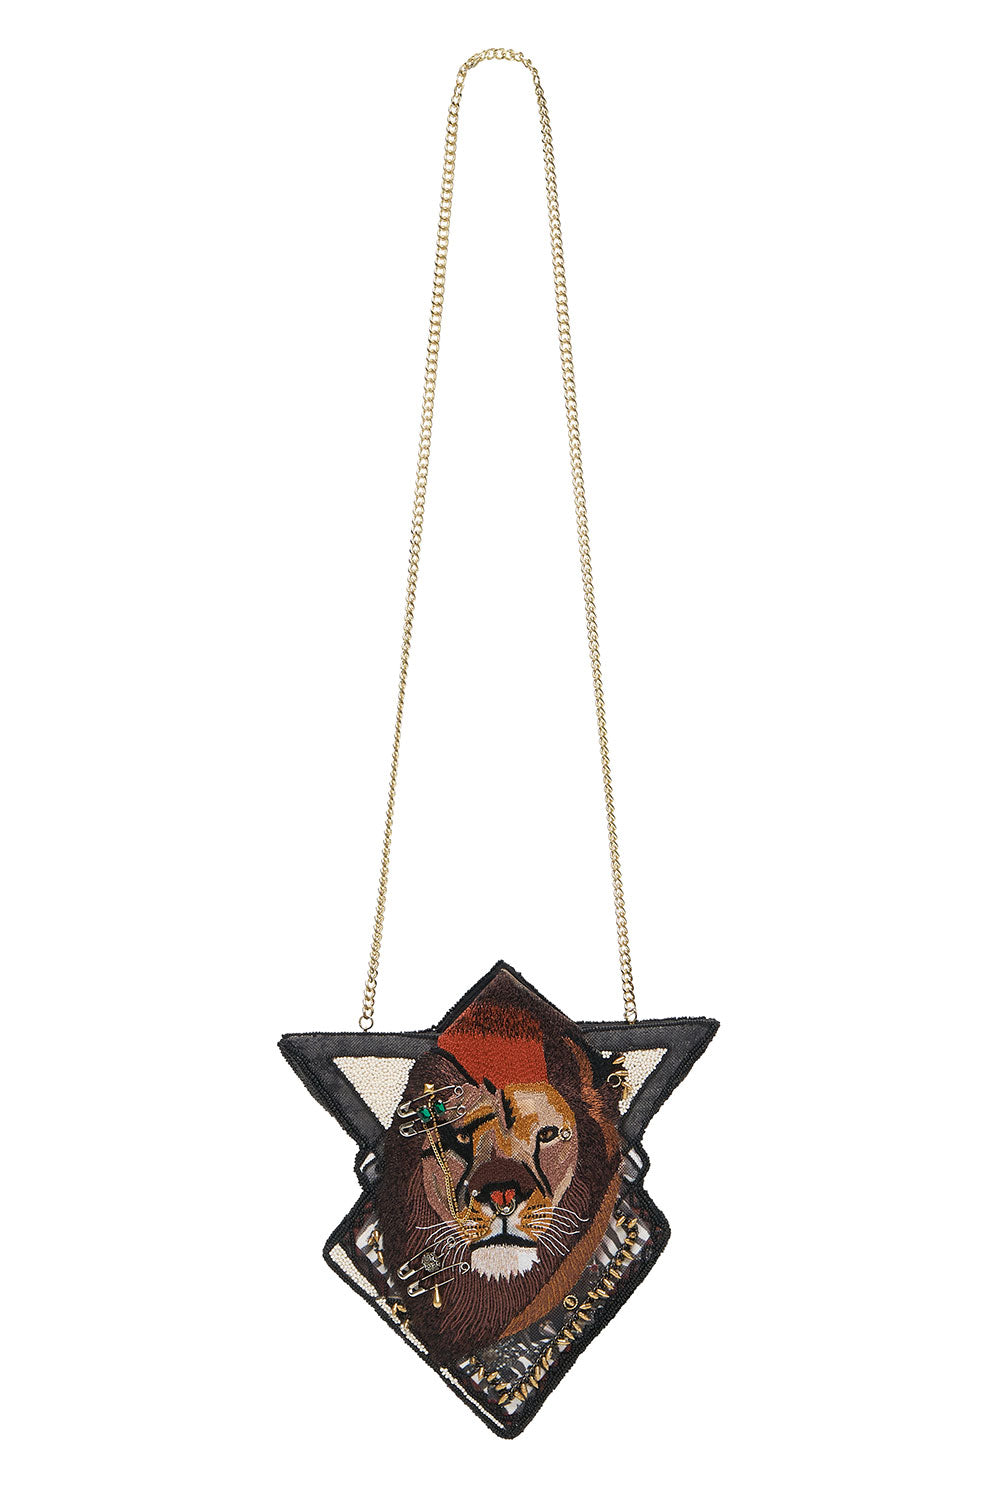 PUNK LION BAG WITH CHAIN SID THE KID